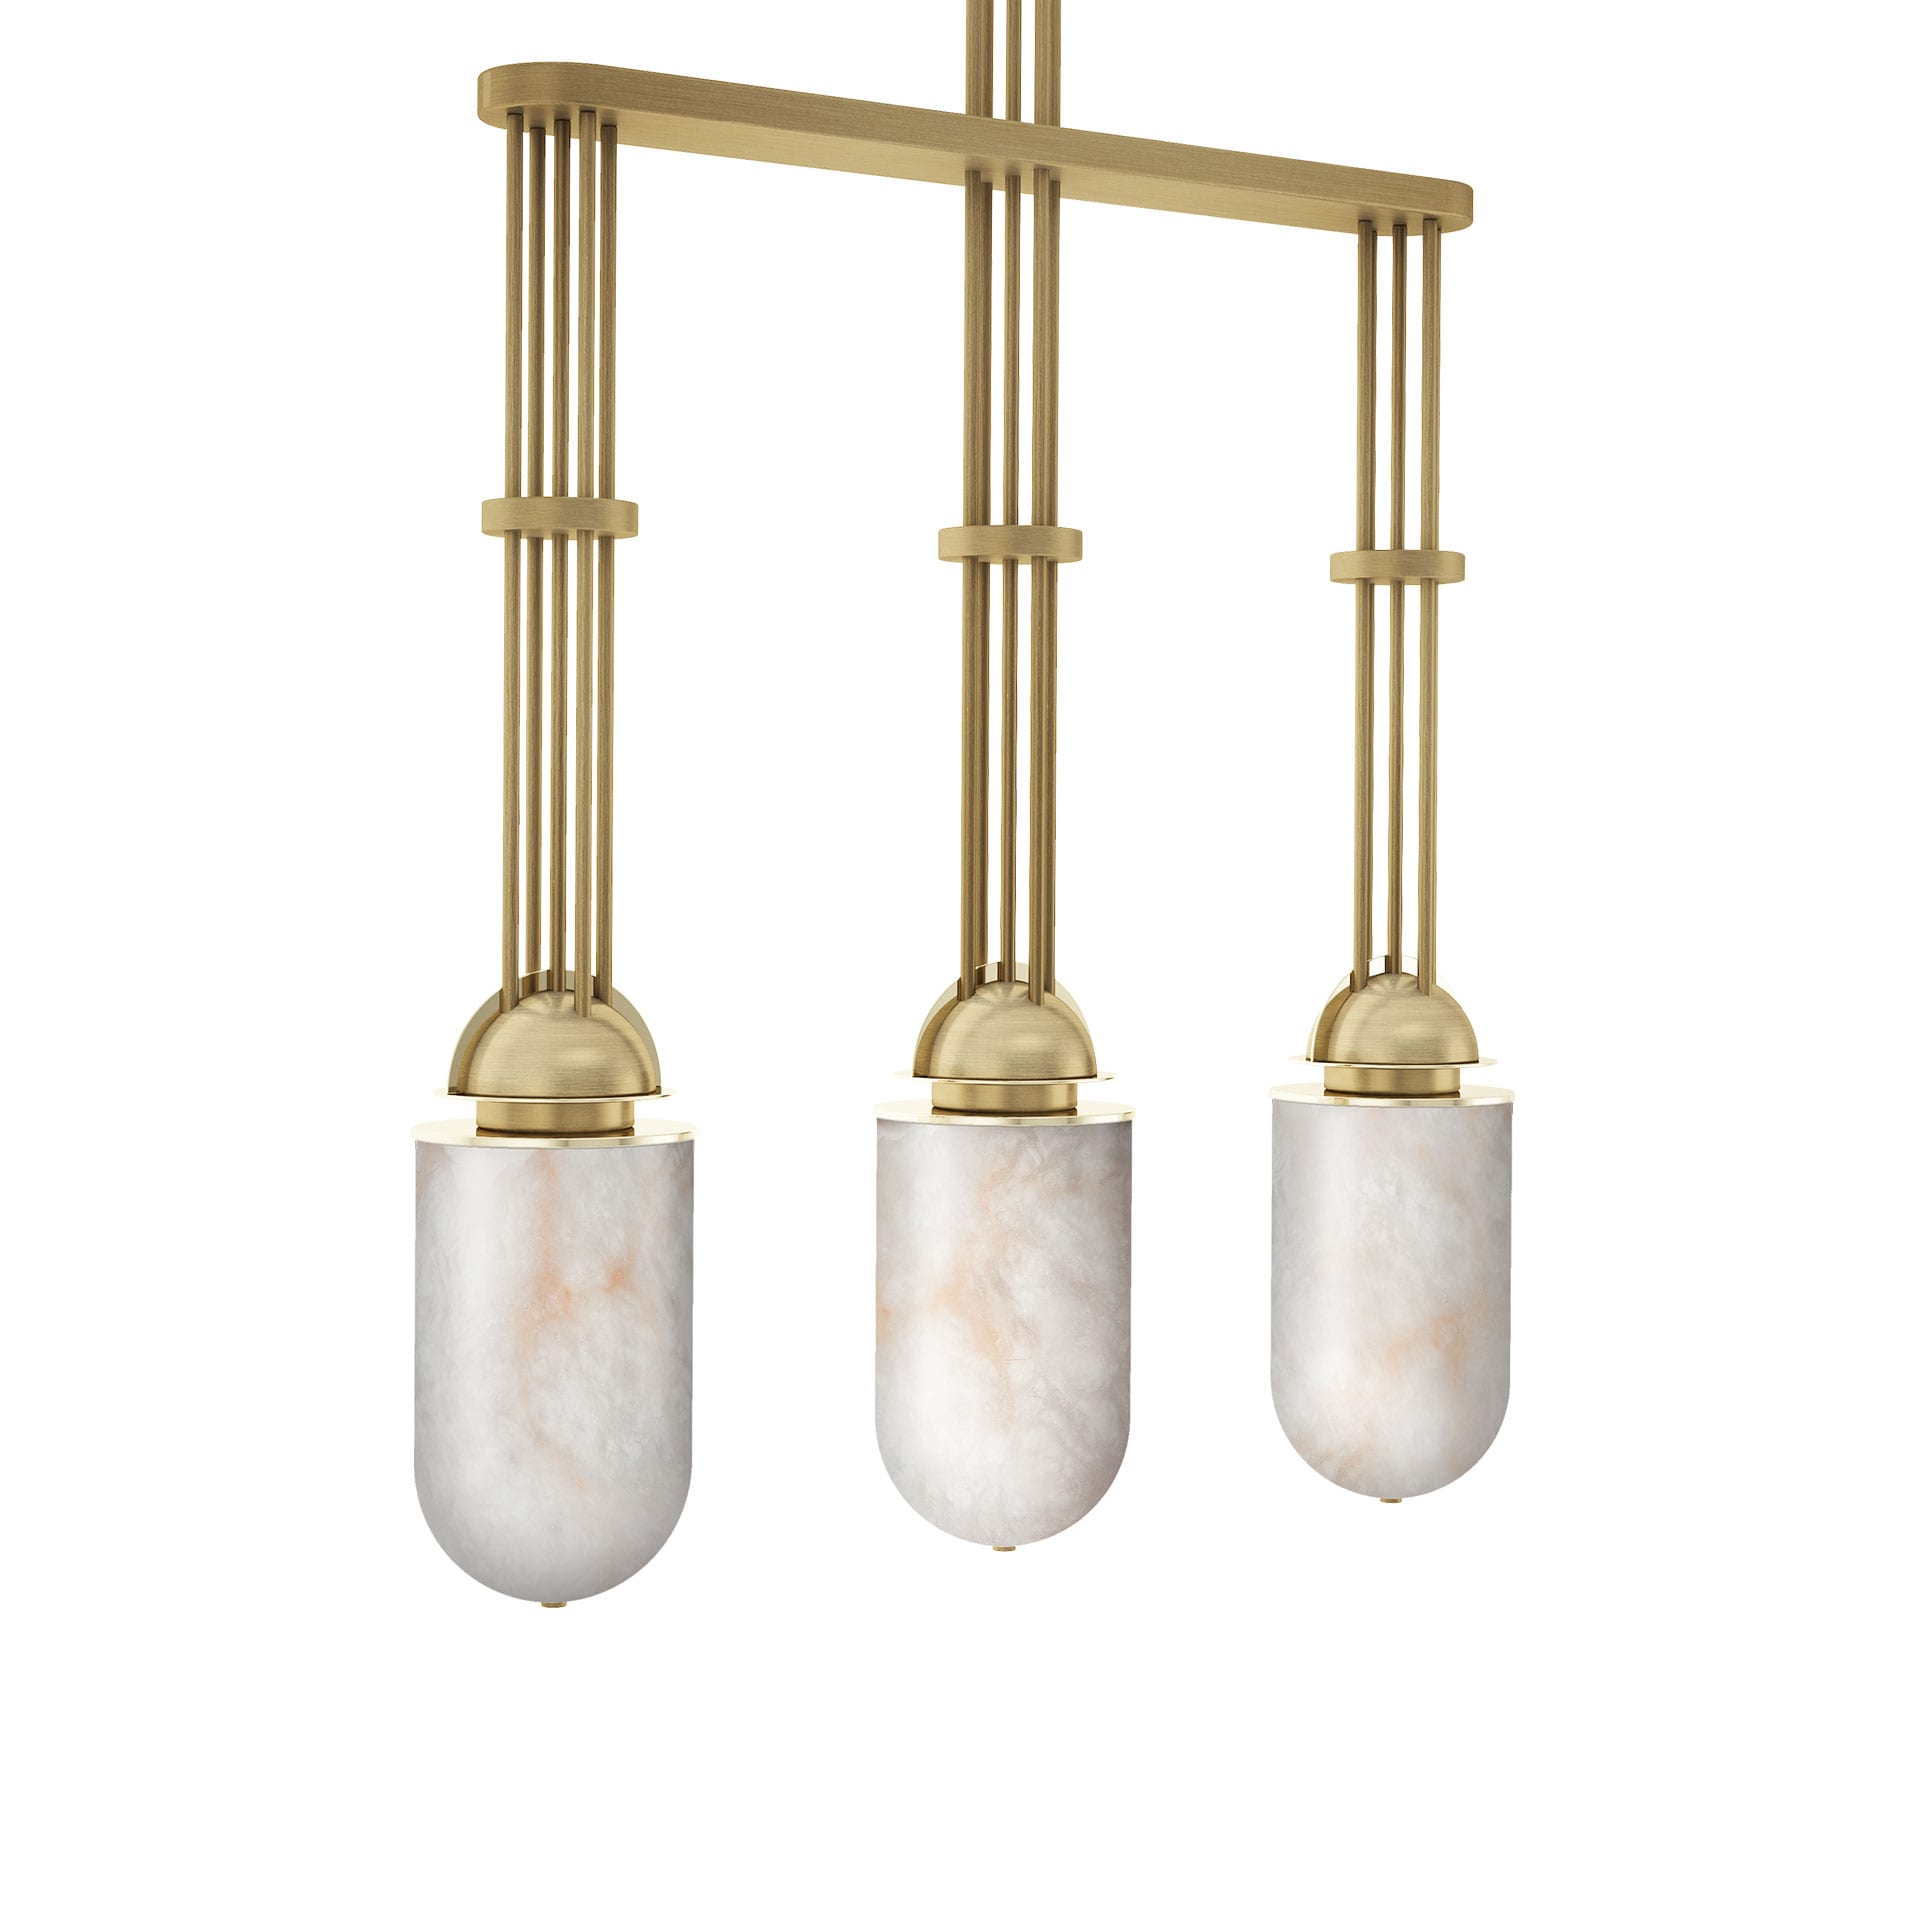 Russell suspension lamp